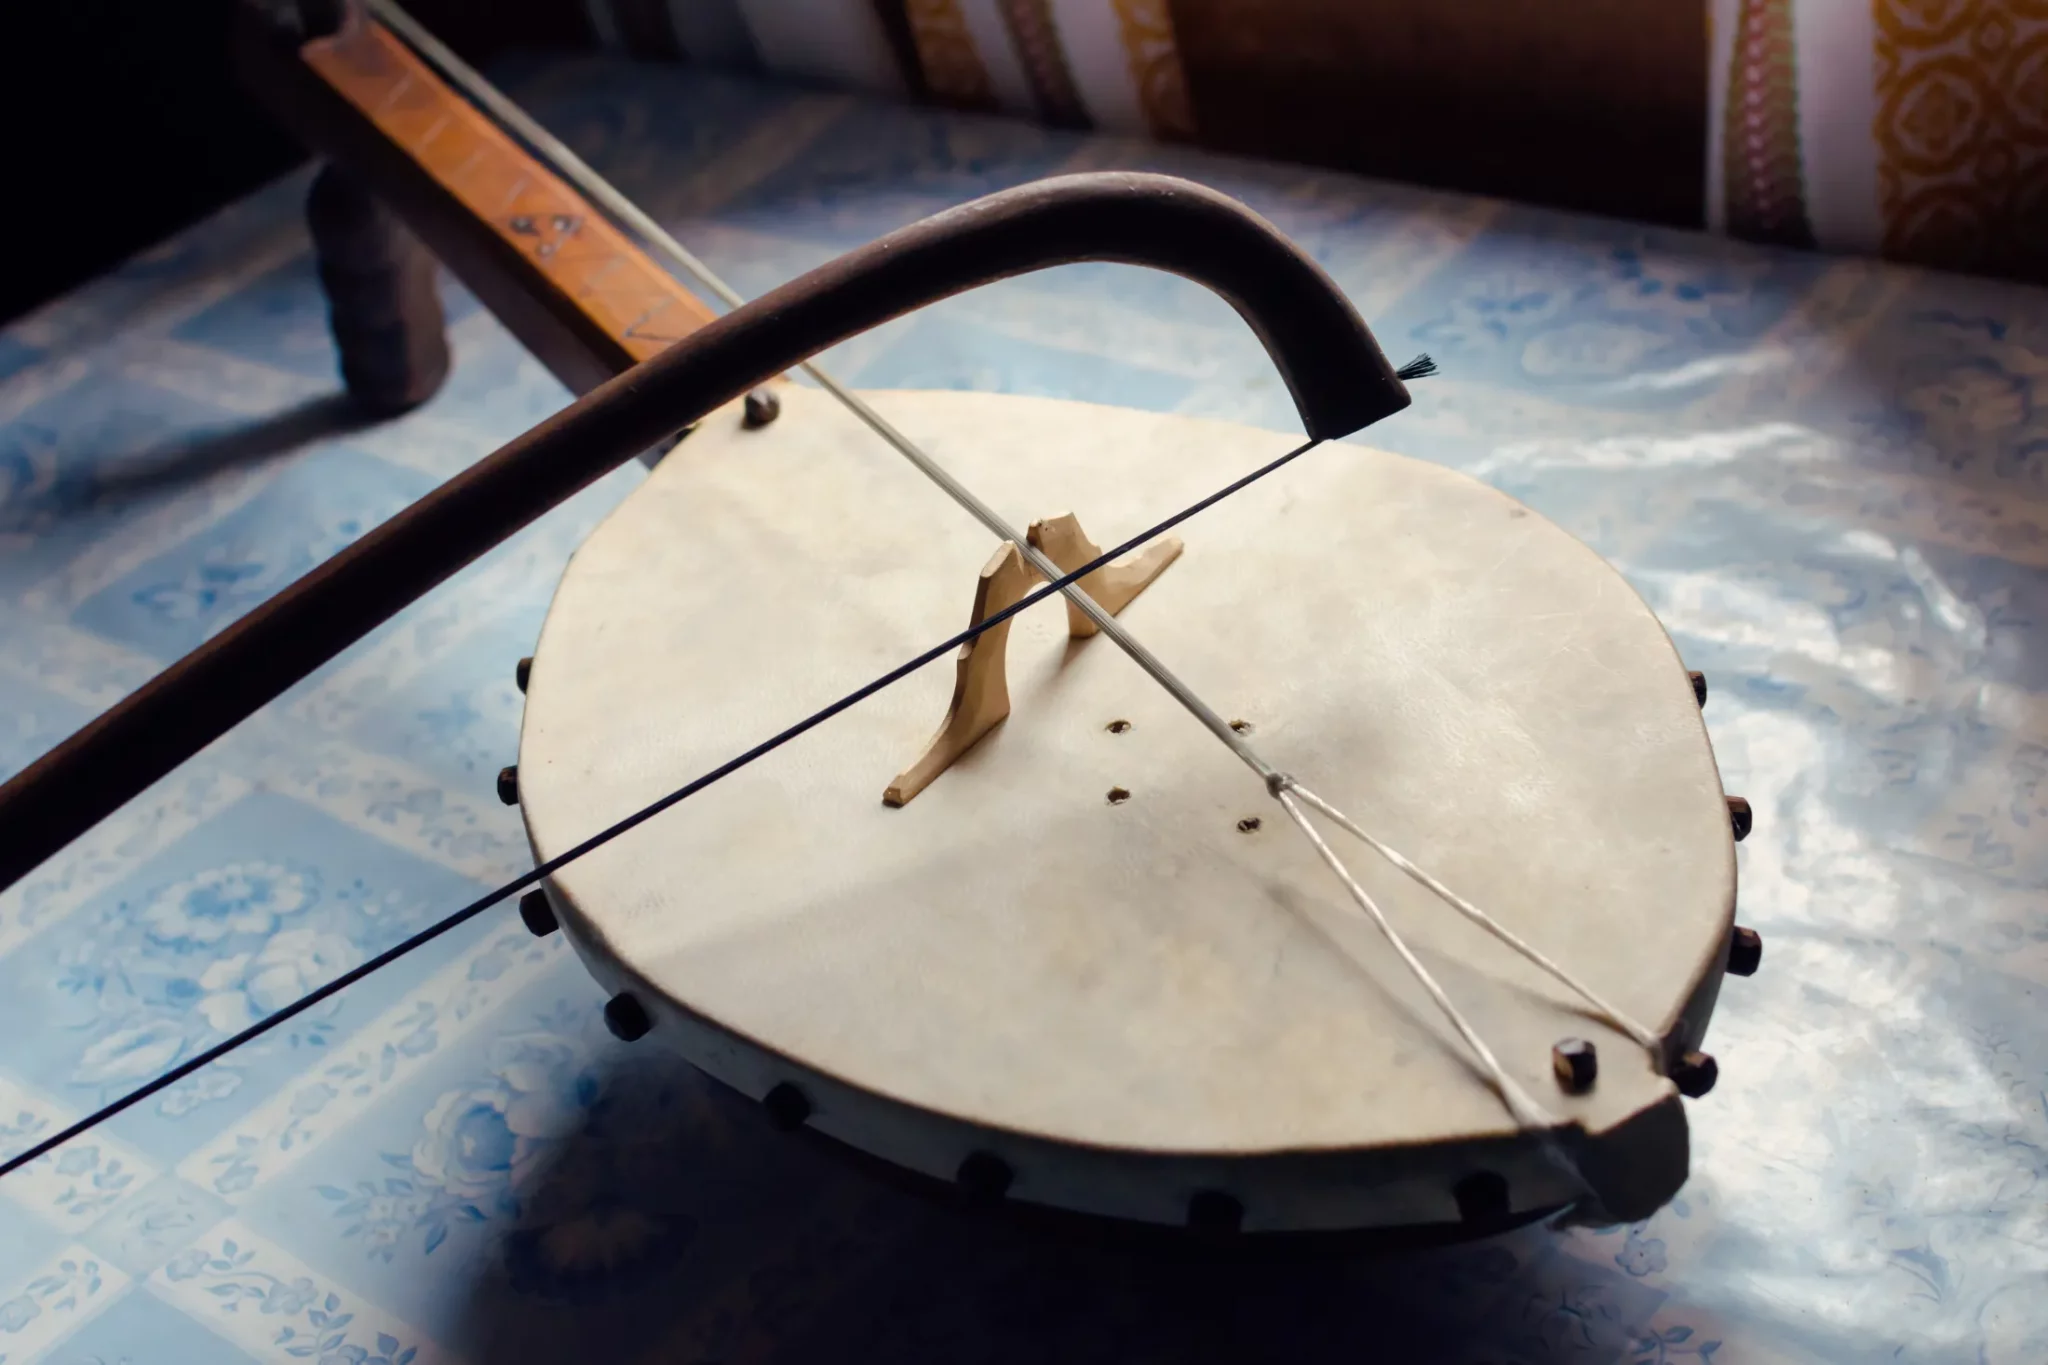 Gusle - The national instrument of Montenegro